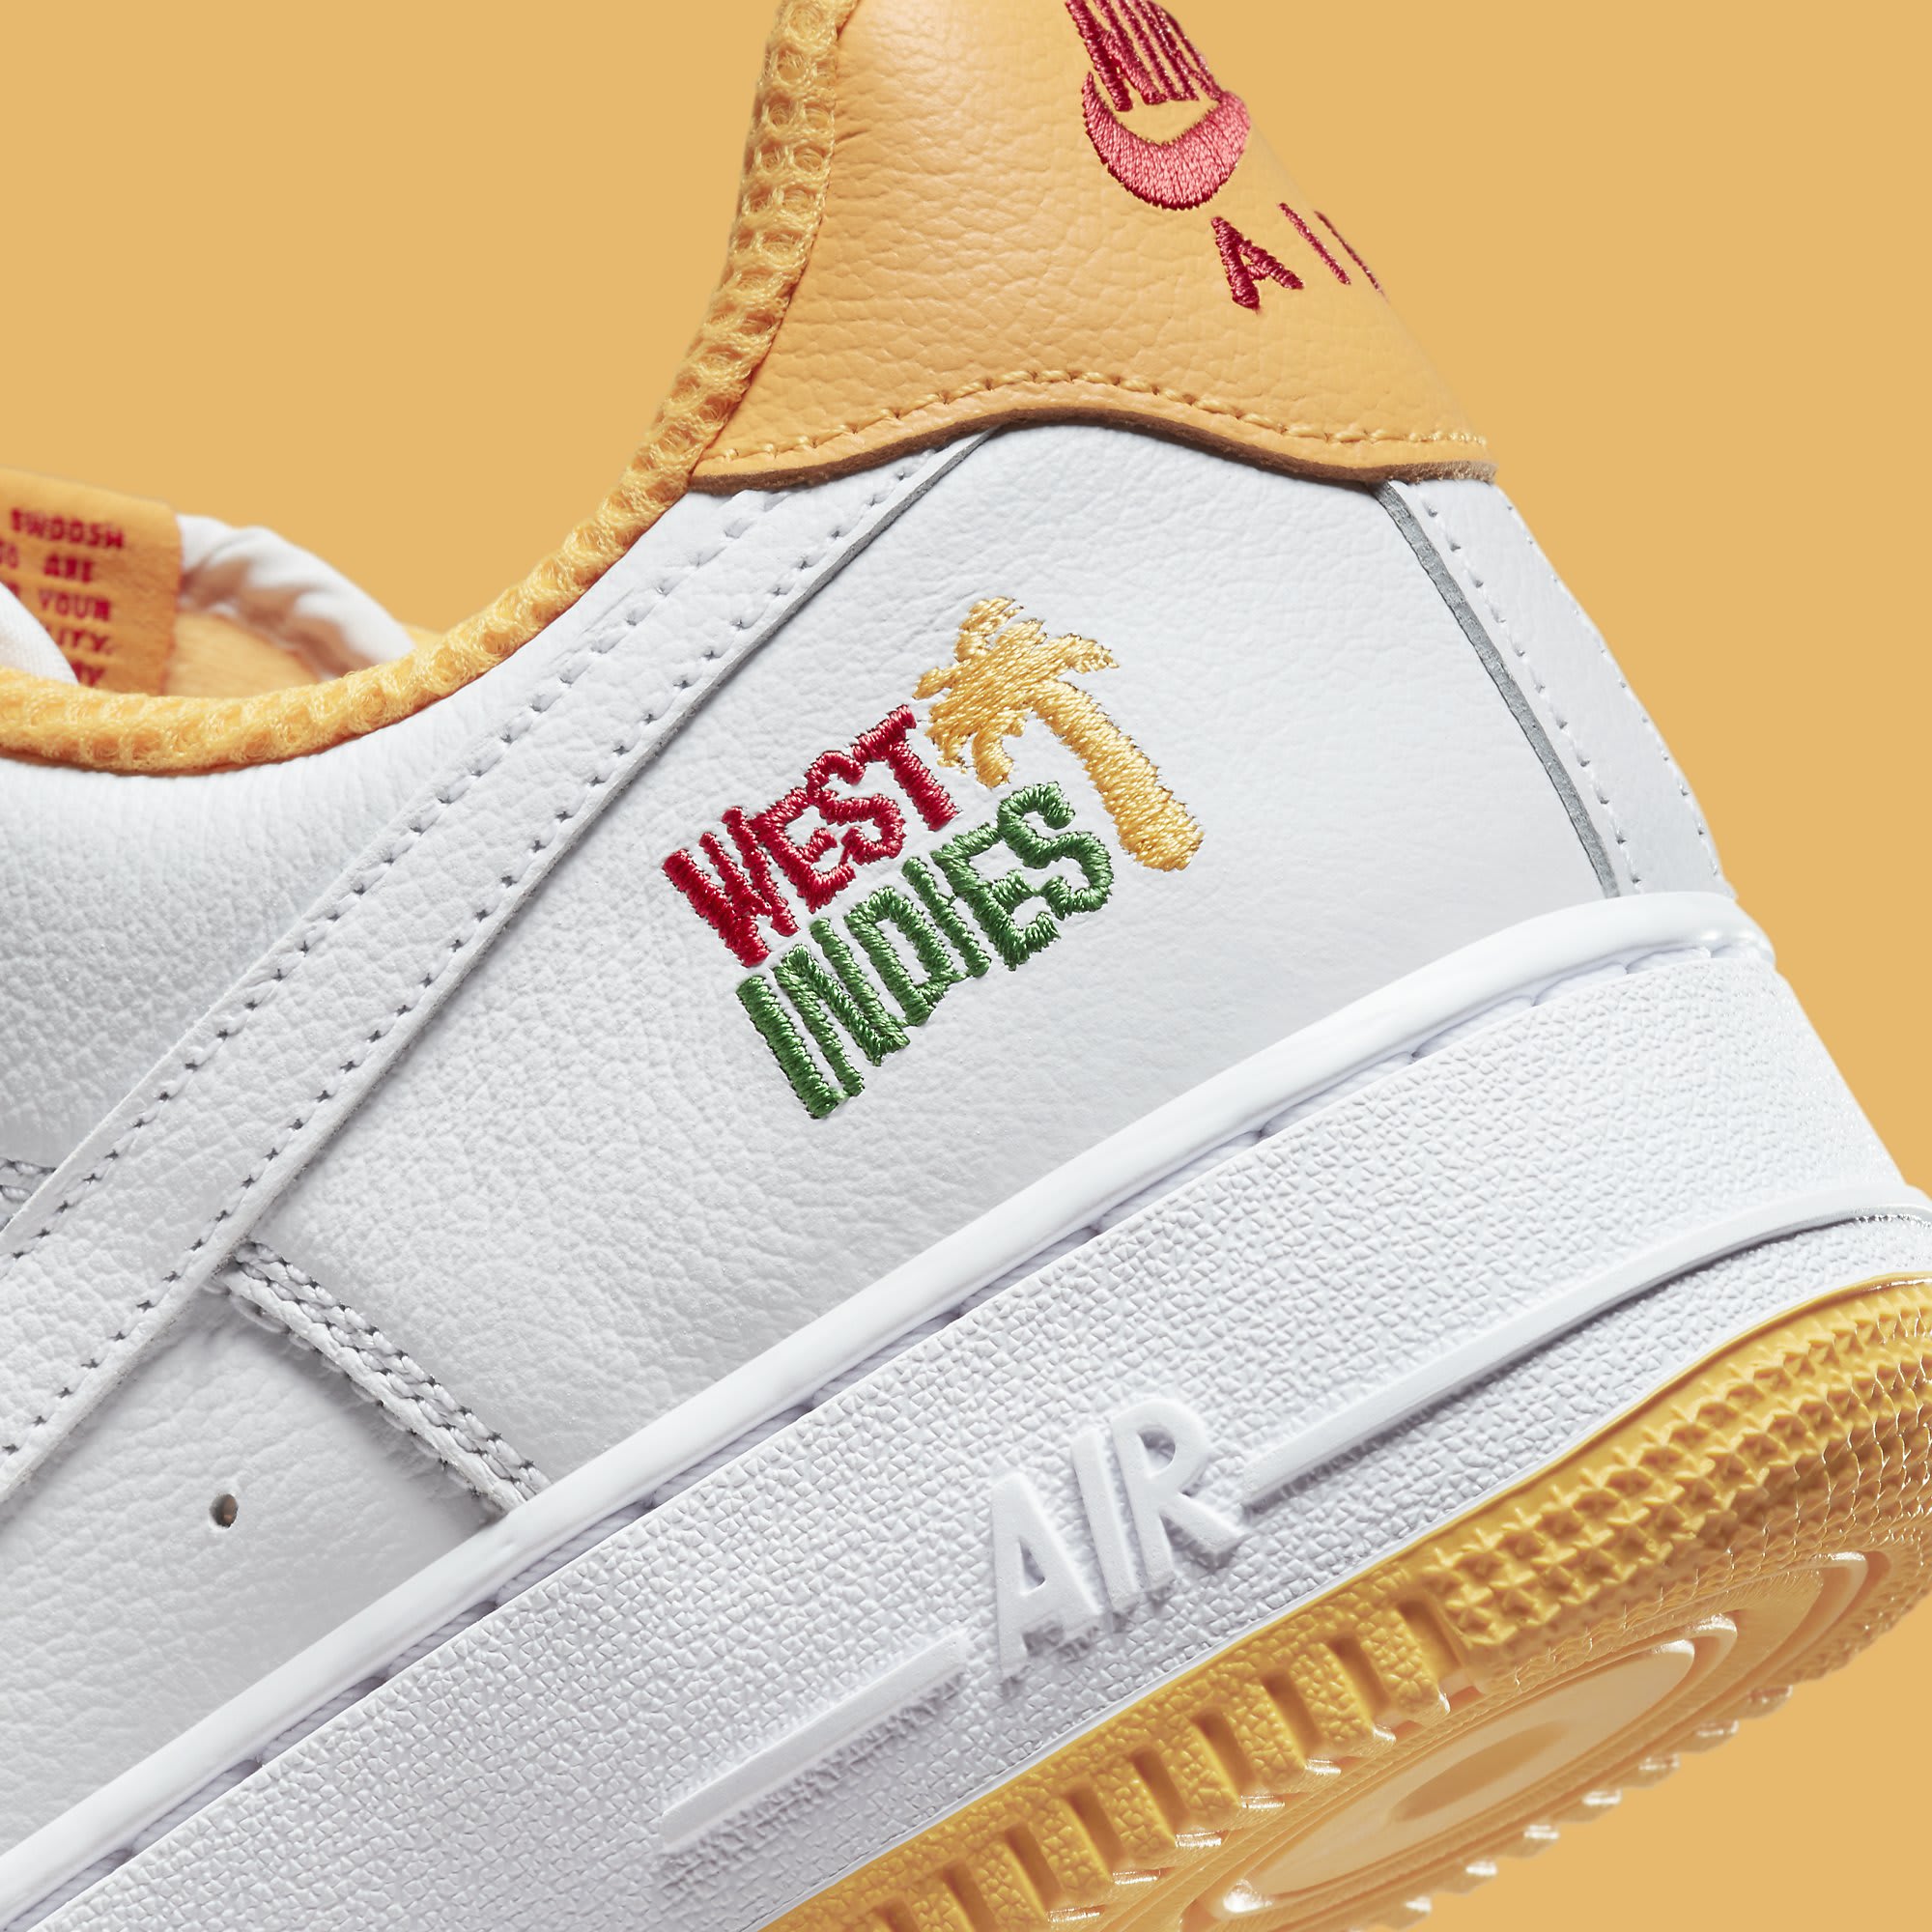 Corporate on Instagram: The Nike Air Force 1 Low 'West Indies